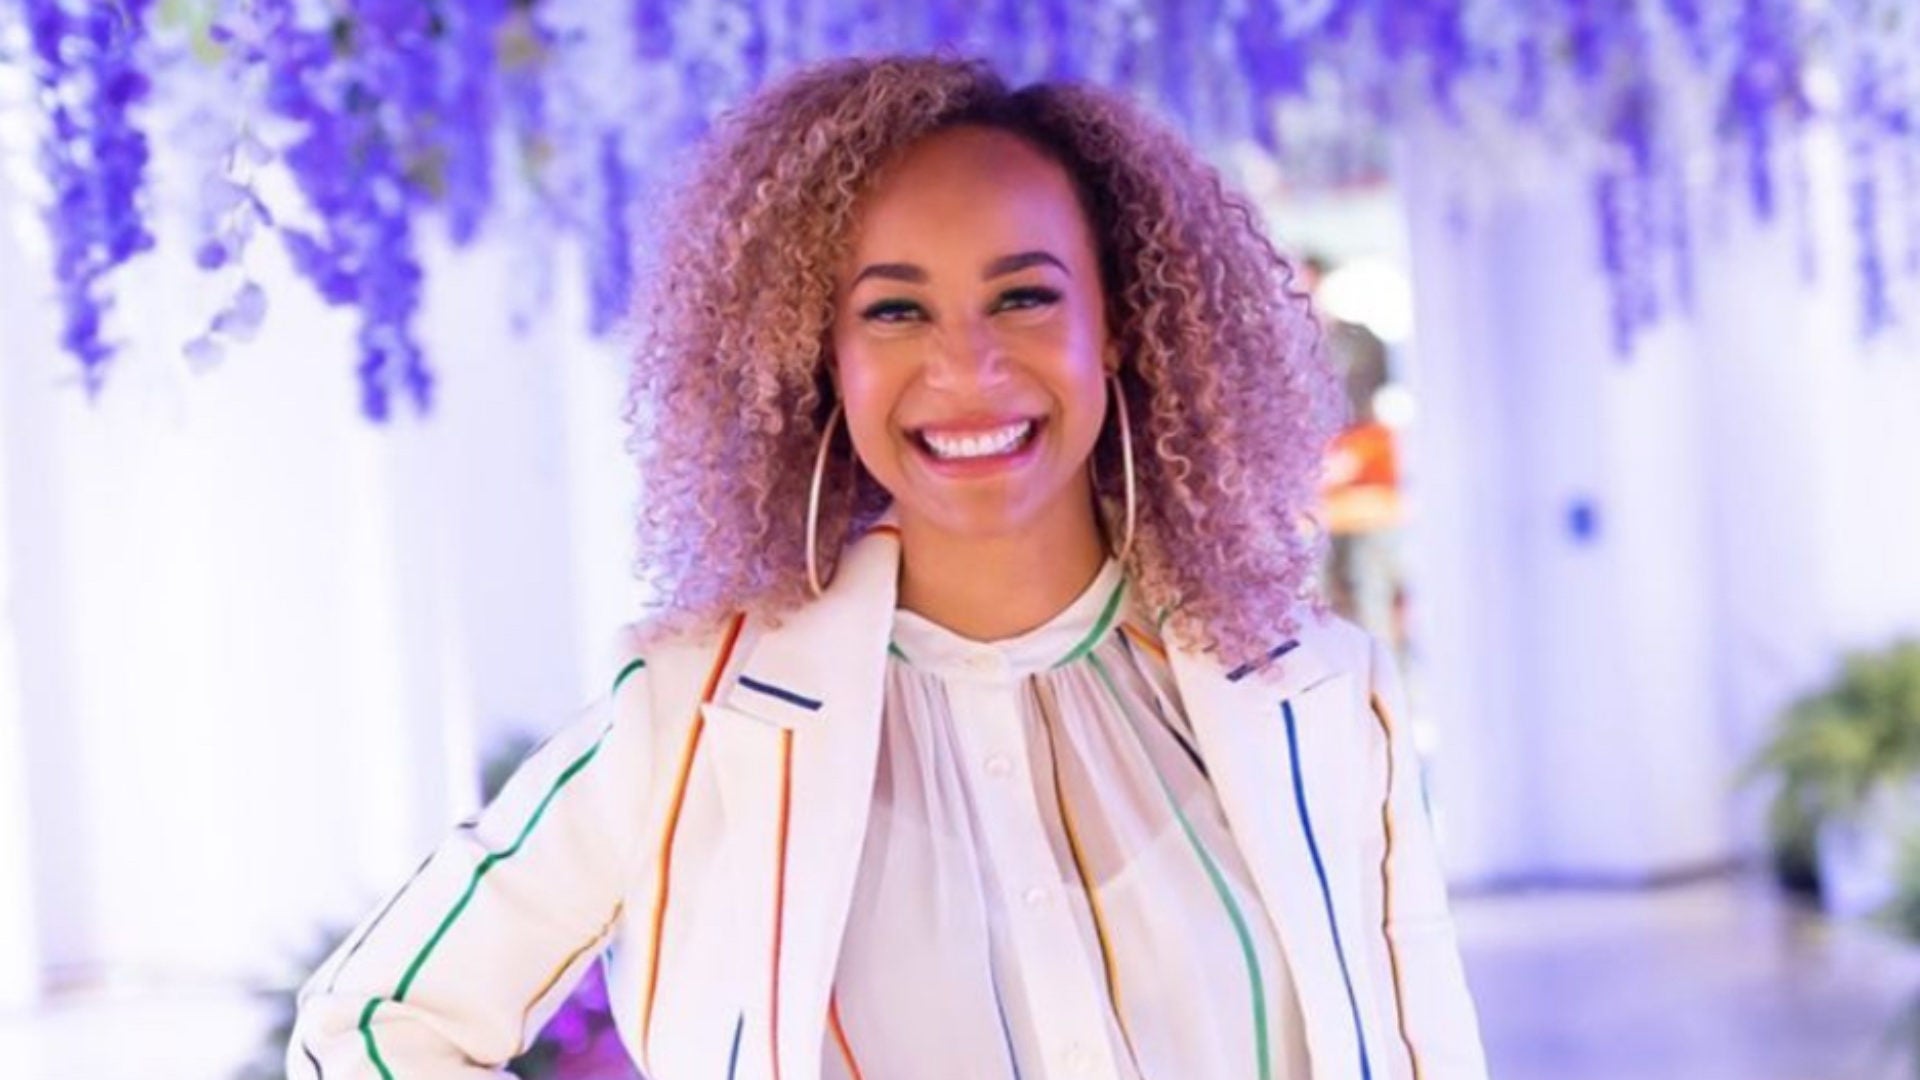 Blavity's CEO Morgan DeBaun Gives Lessons On Leveling Up                  .